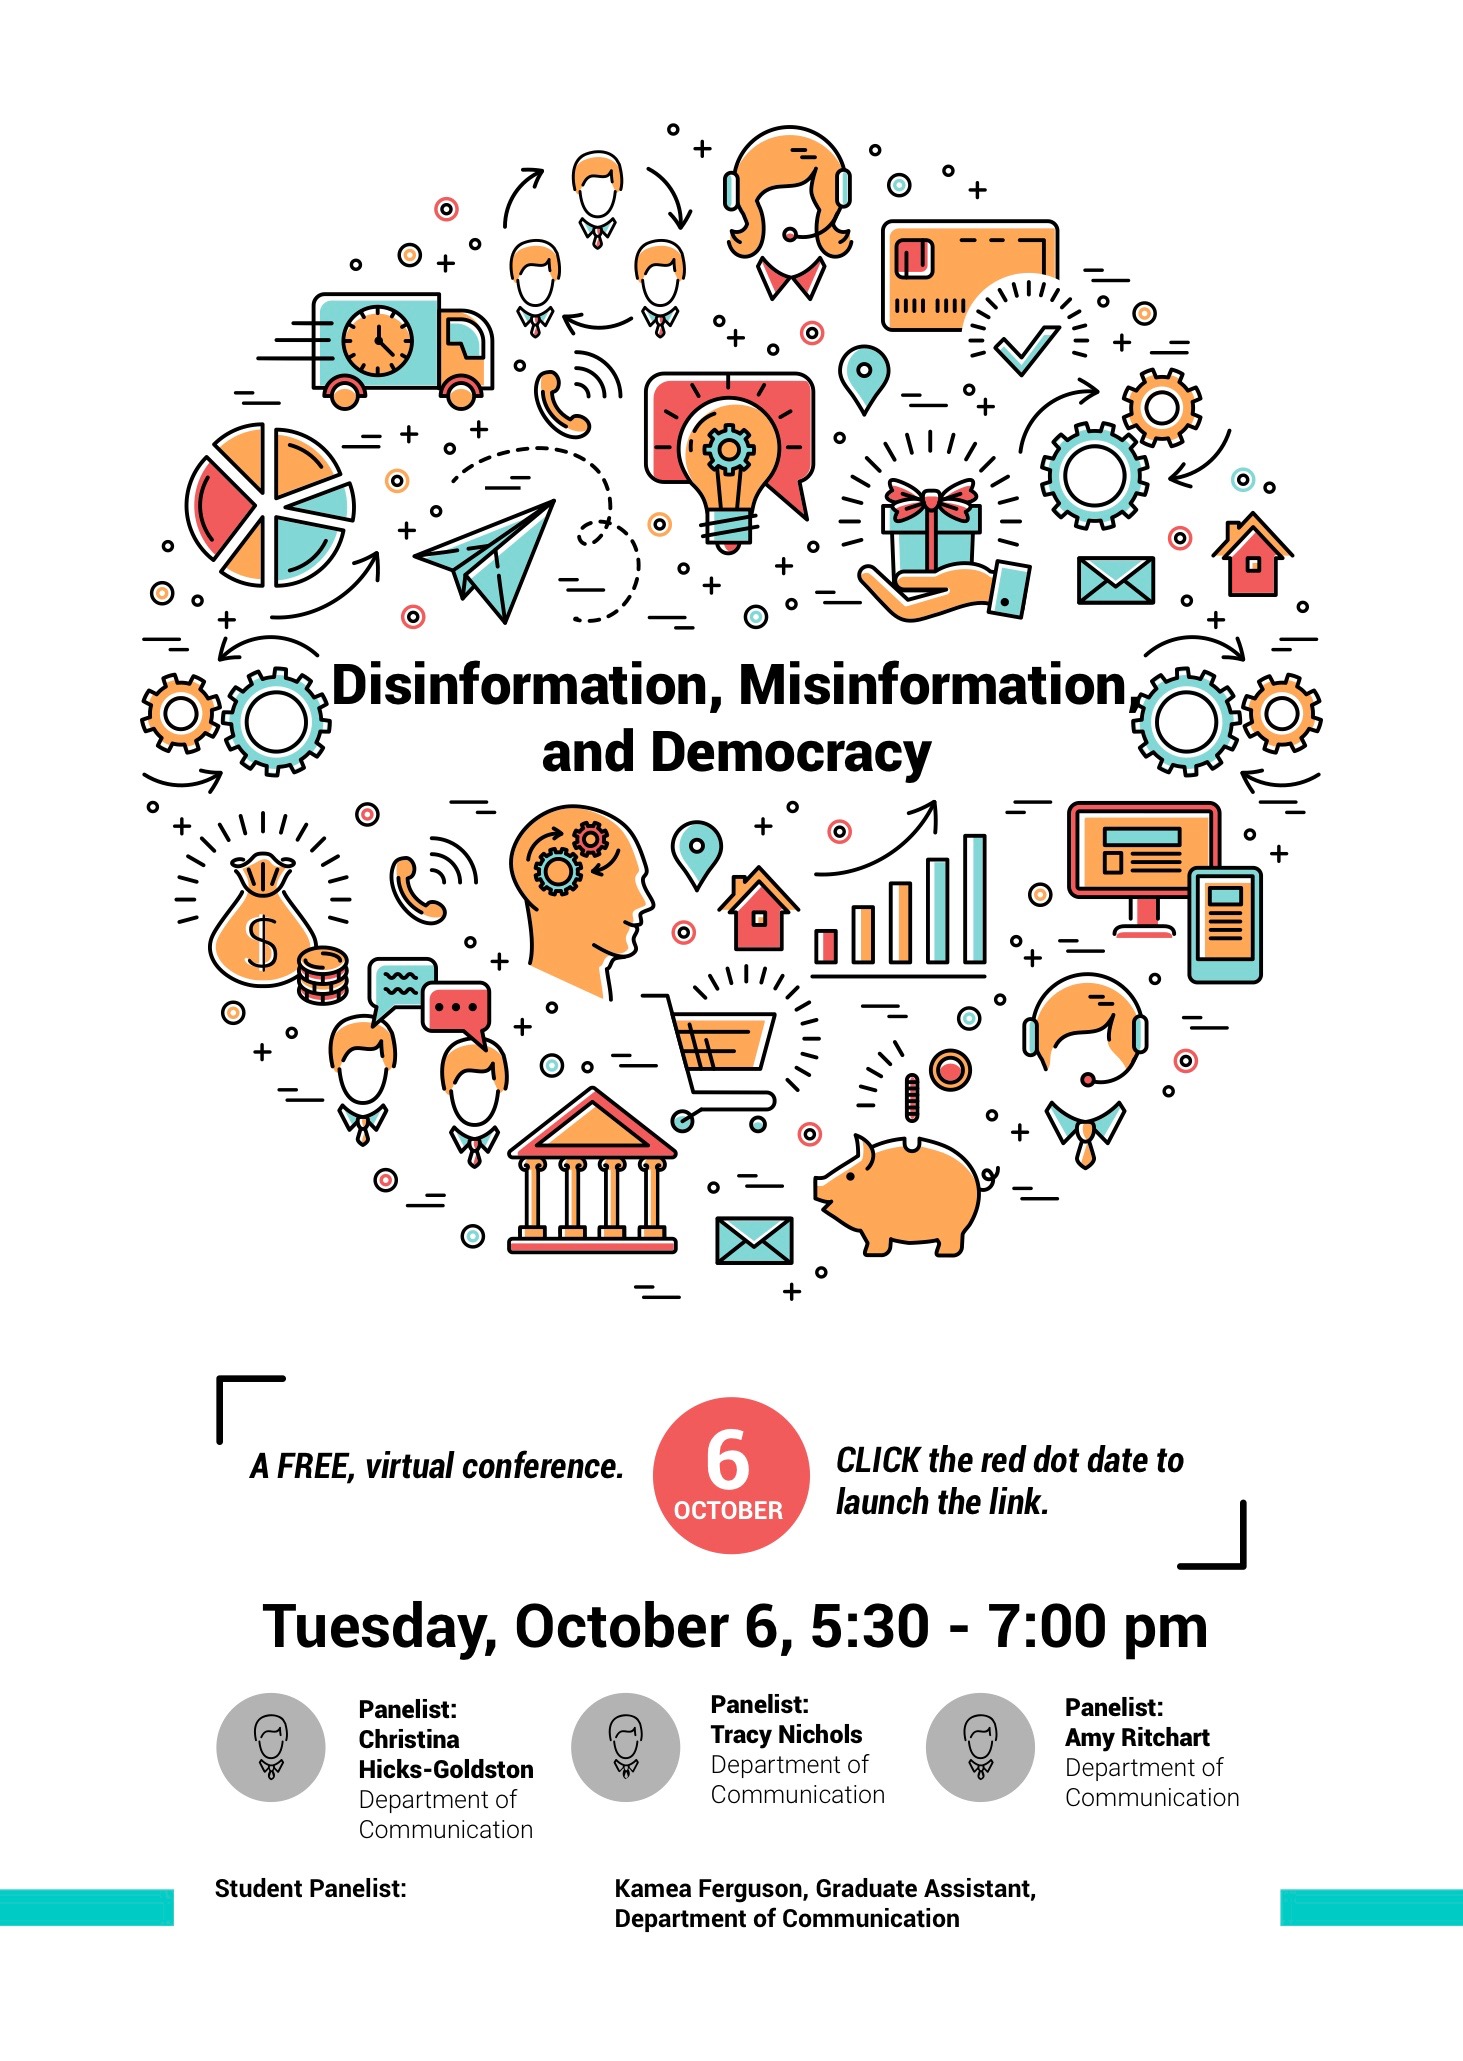 The Honors Program at Austin Peay State University will host a timely virtual panel discussion this week that examines how people can think more critically and carefully to be informed voters in the current political climate.